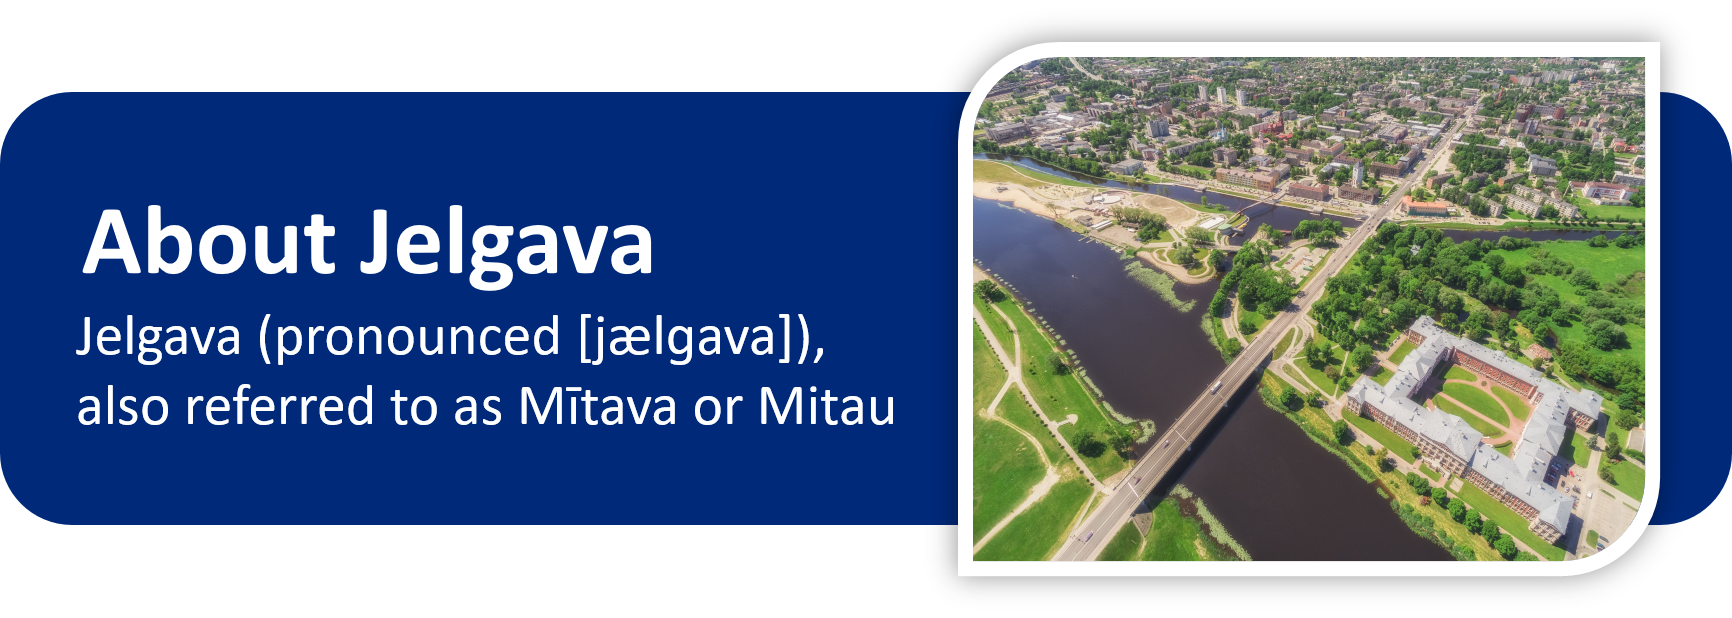 About_Jelgava.png